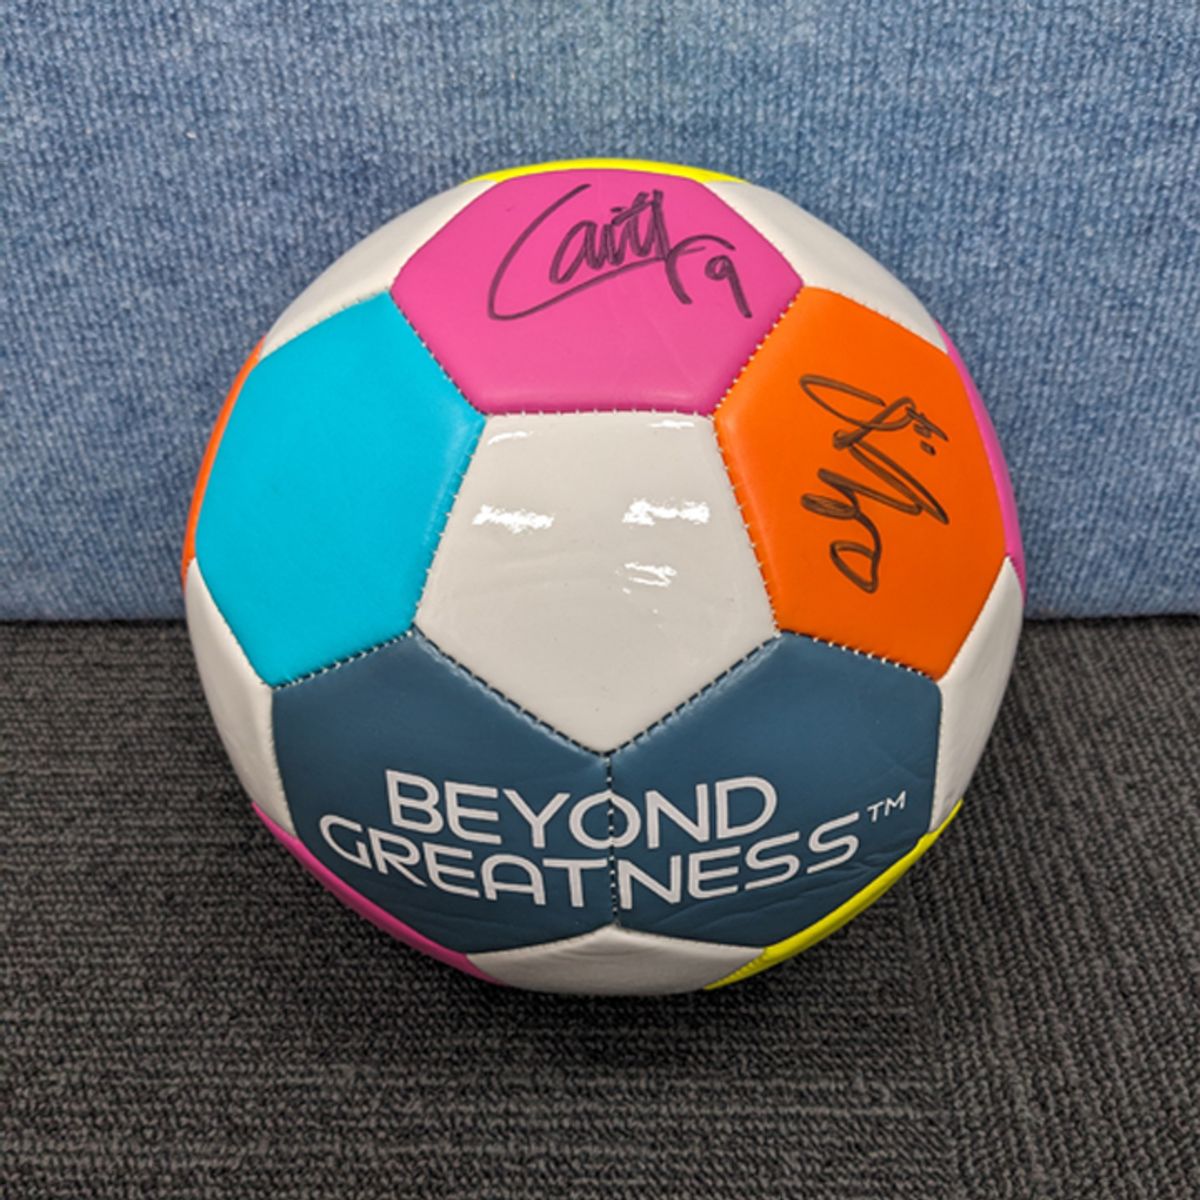 WWC23 Football Signed By Caitlin Foord 9 and Alanna Kennedy 14 - Hero image